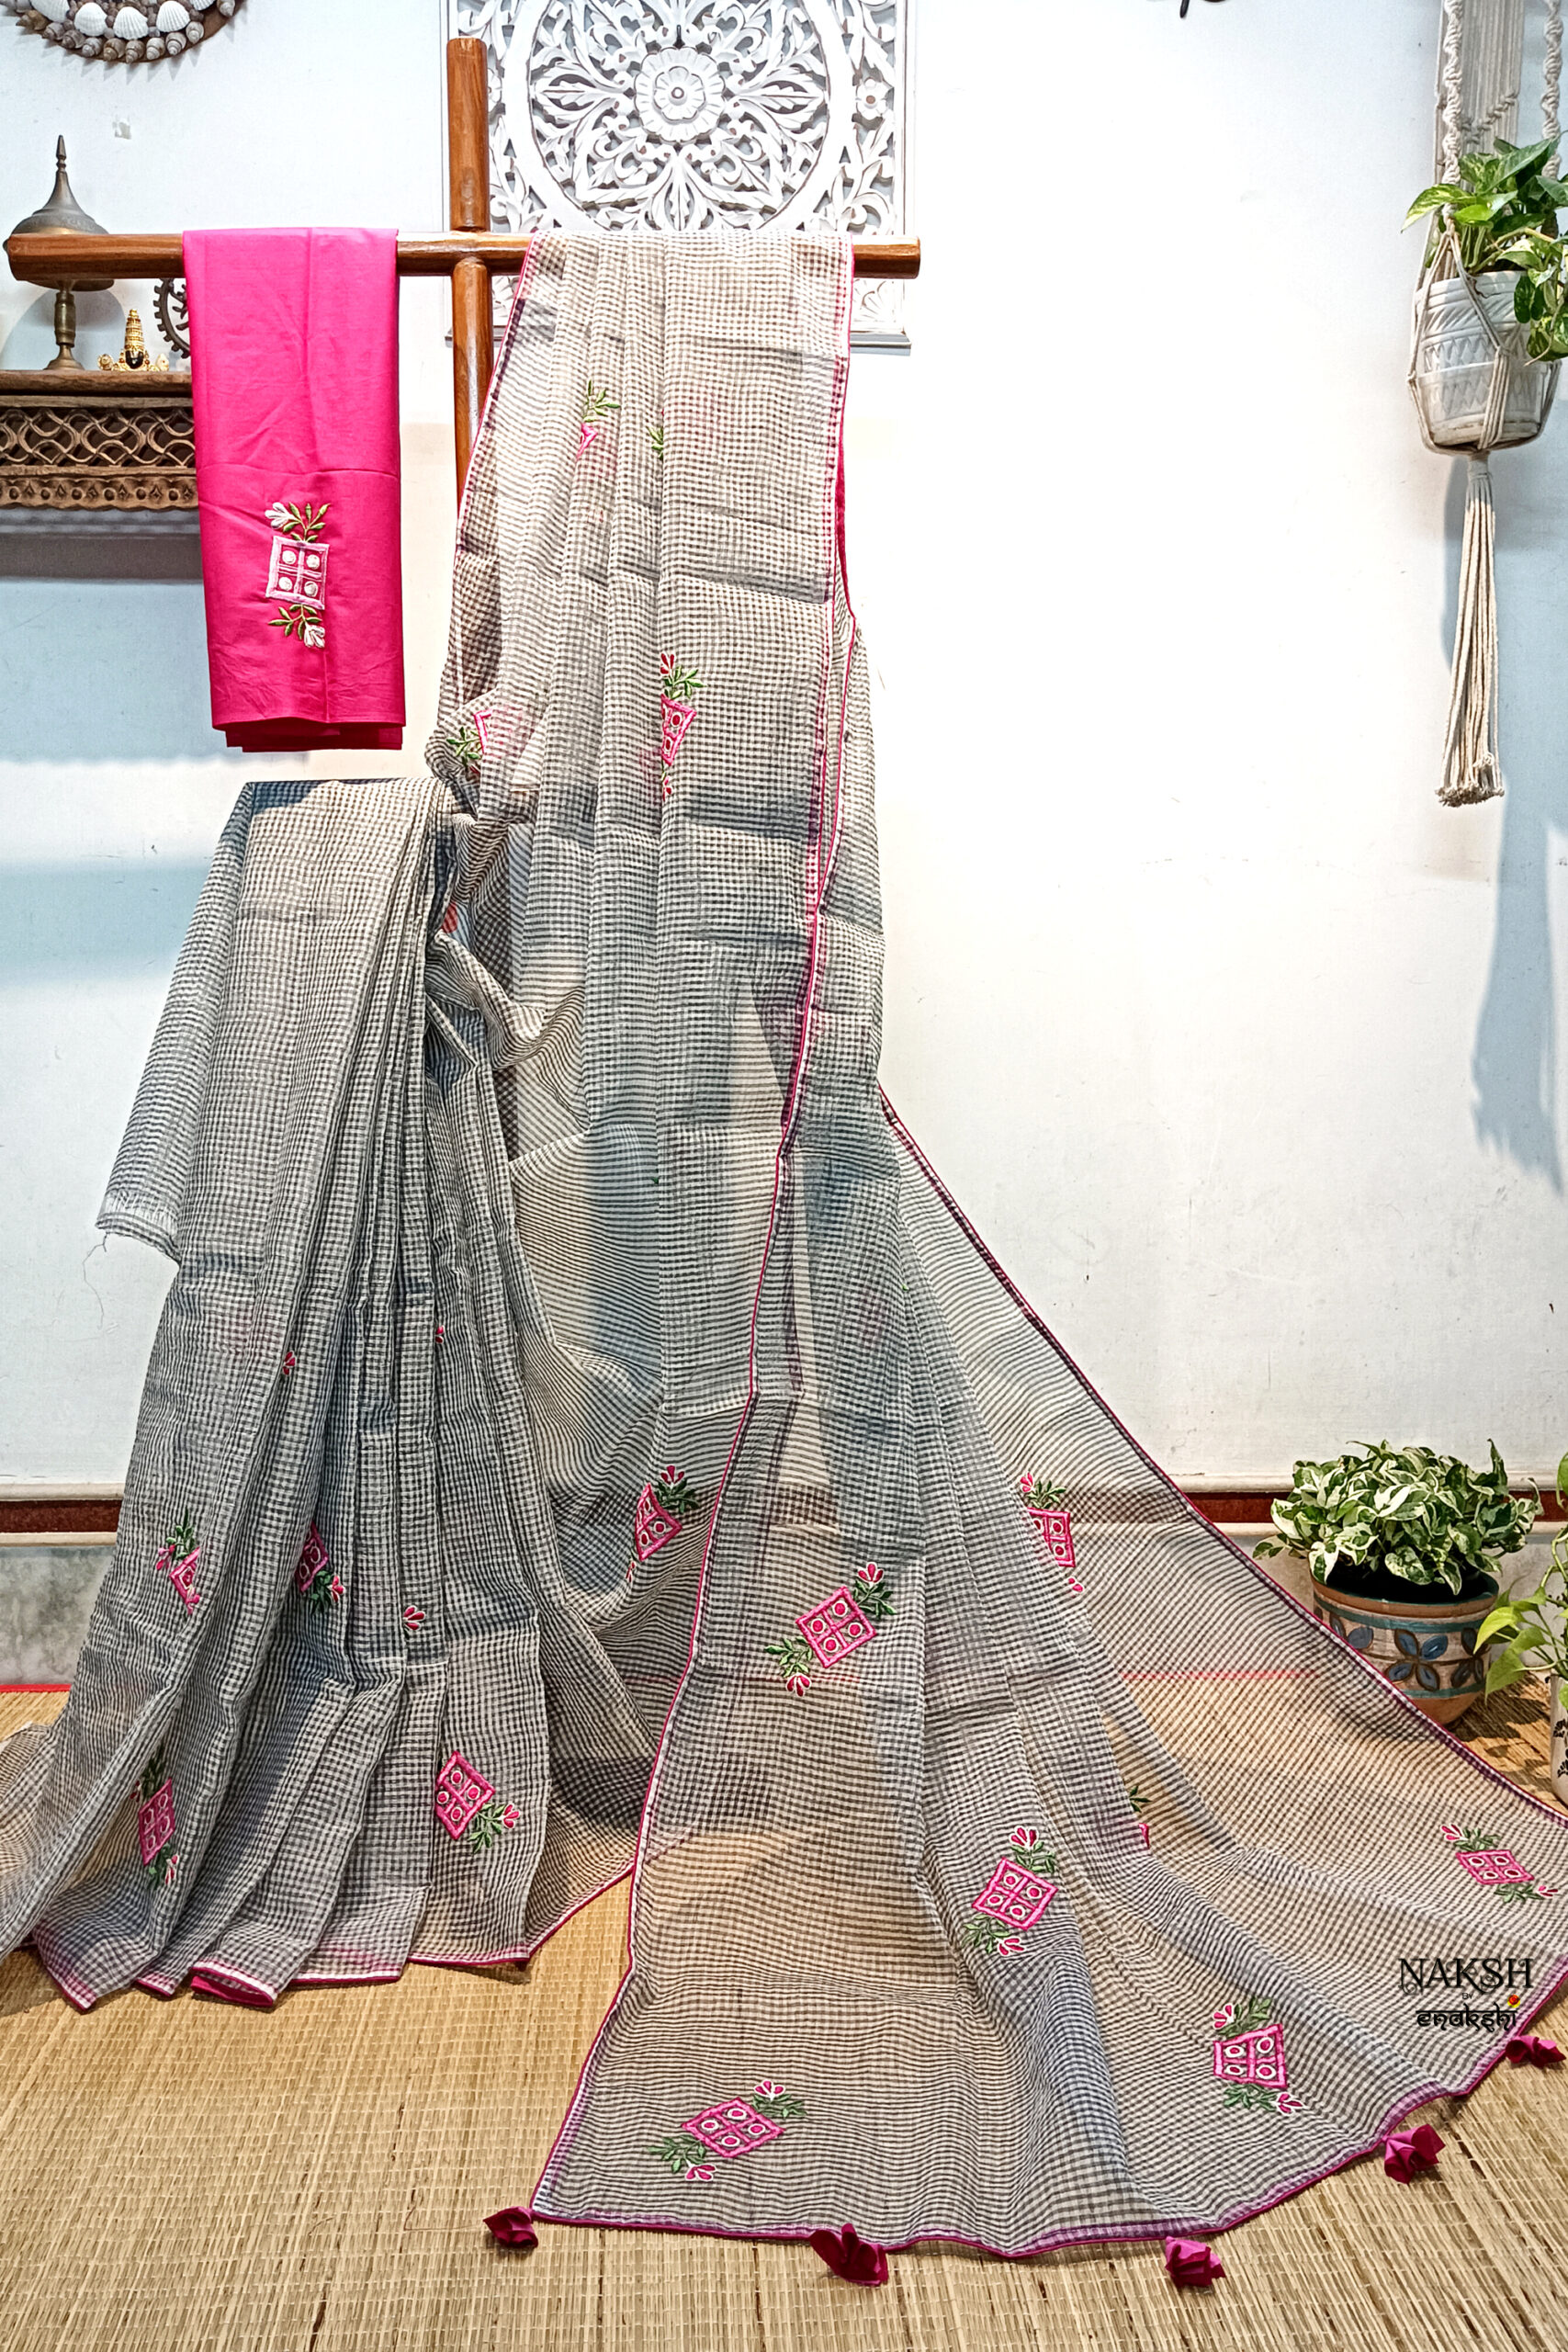 Handloom resham by cotton checks saree with embroidery work on grey color. A small and pretty floral motif has been neatly embroidered